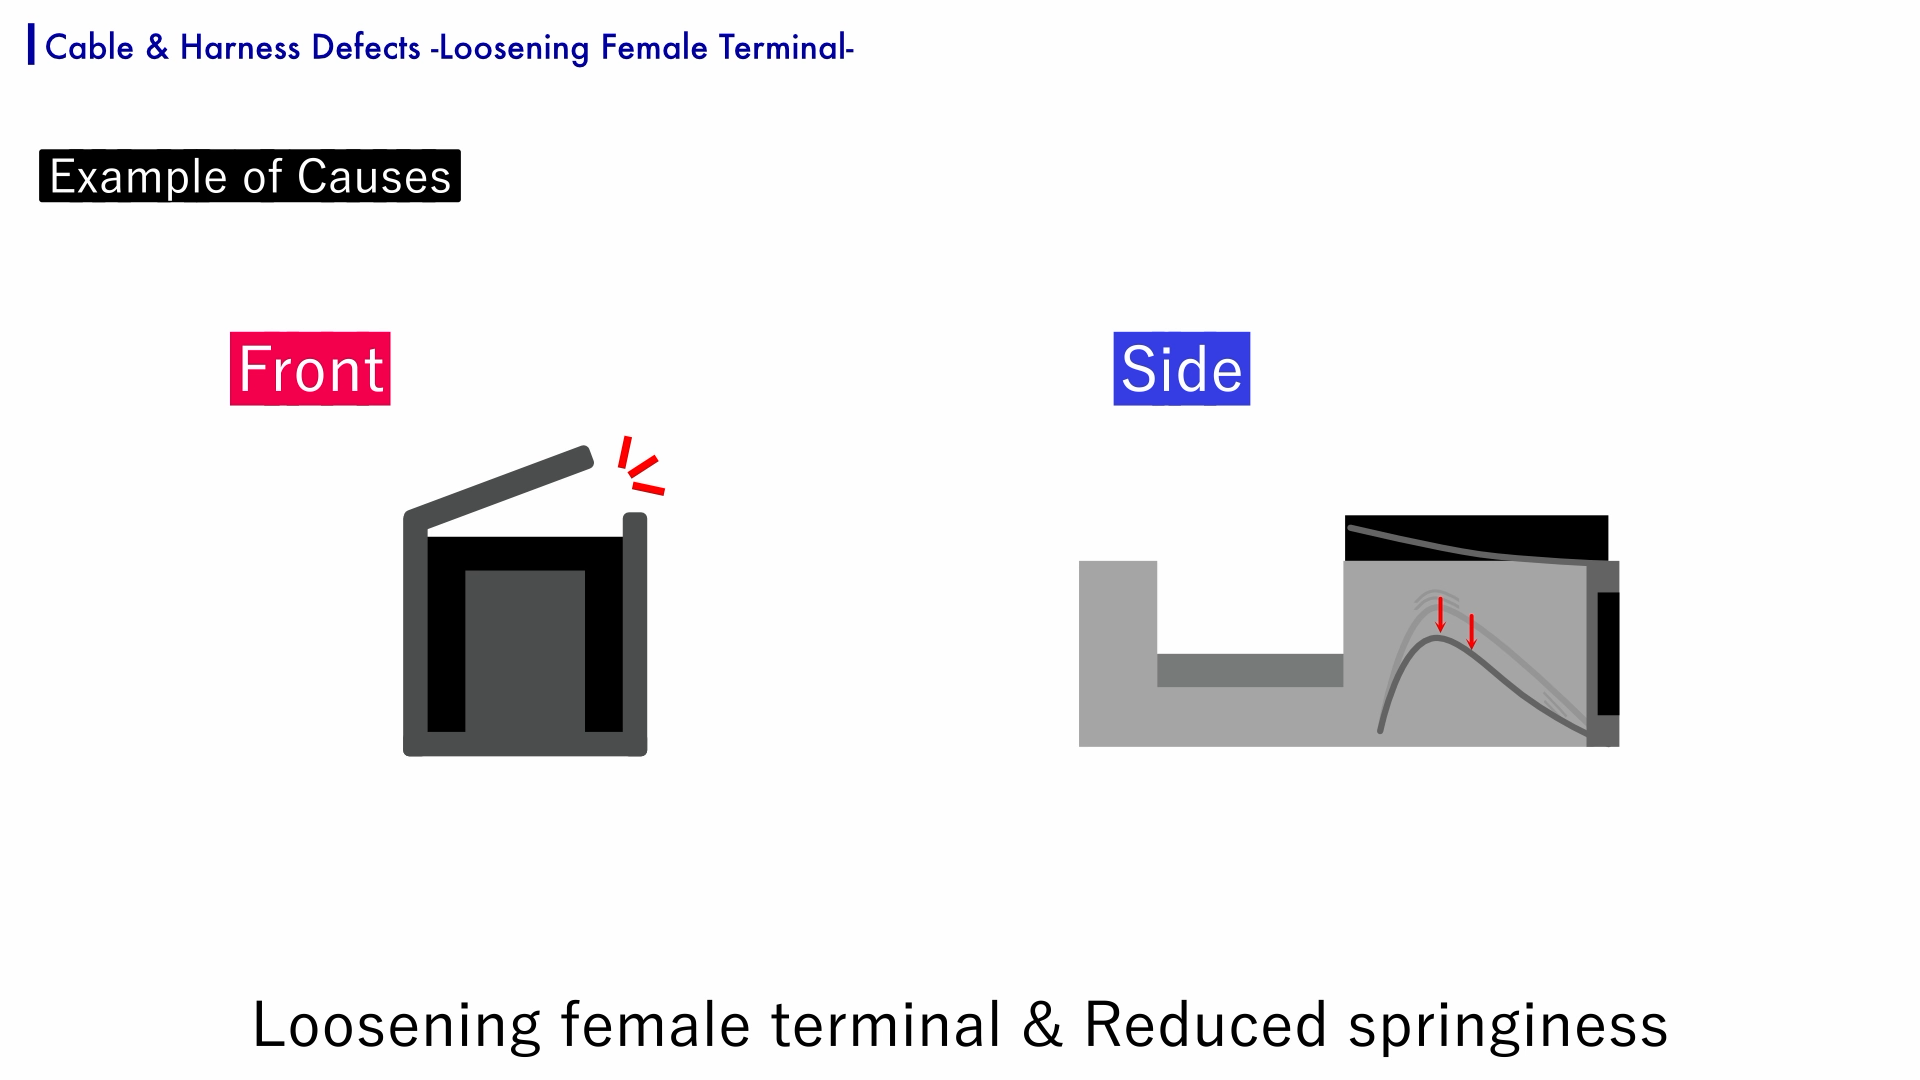 The-spring-of-the-terminal-that-stabilizes-the-contact-becomes-less-effective